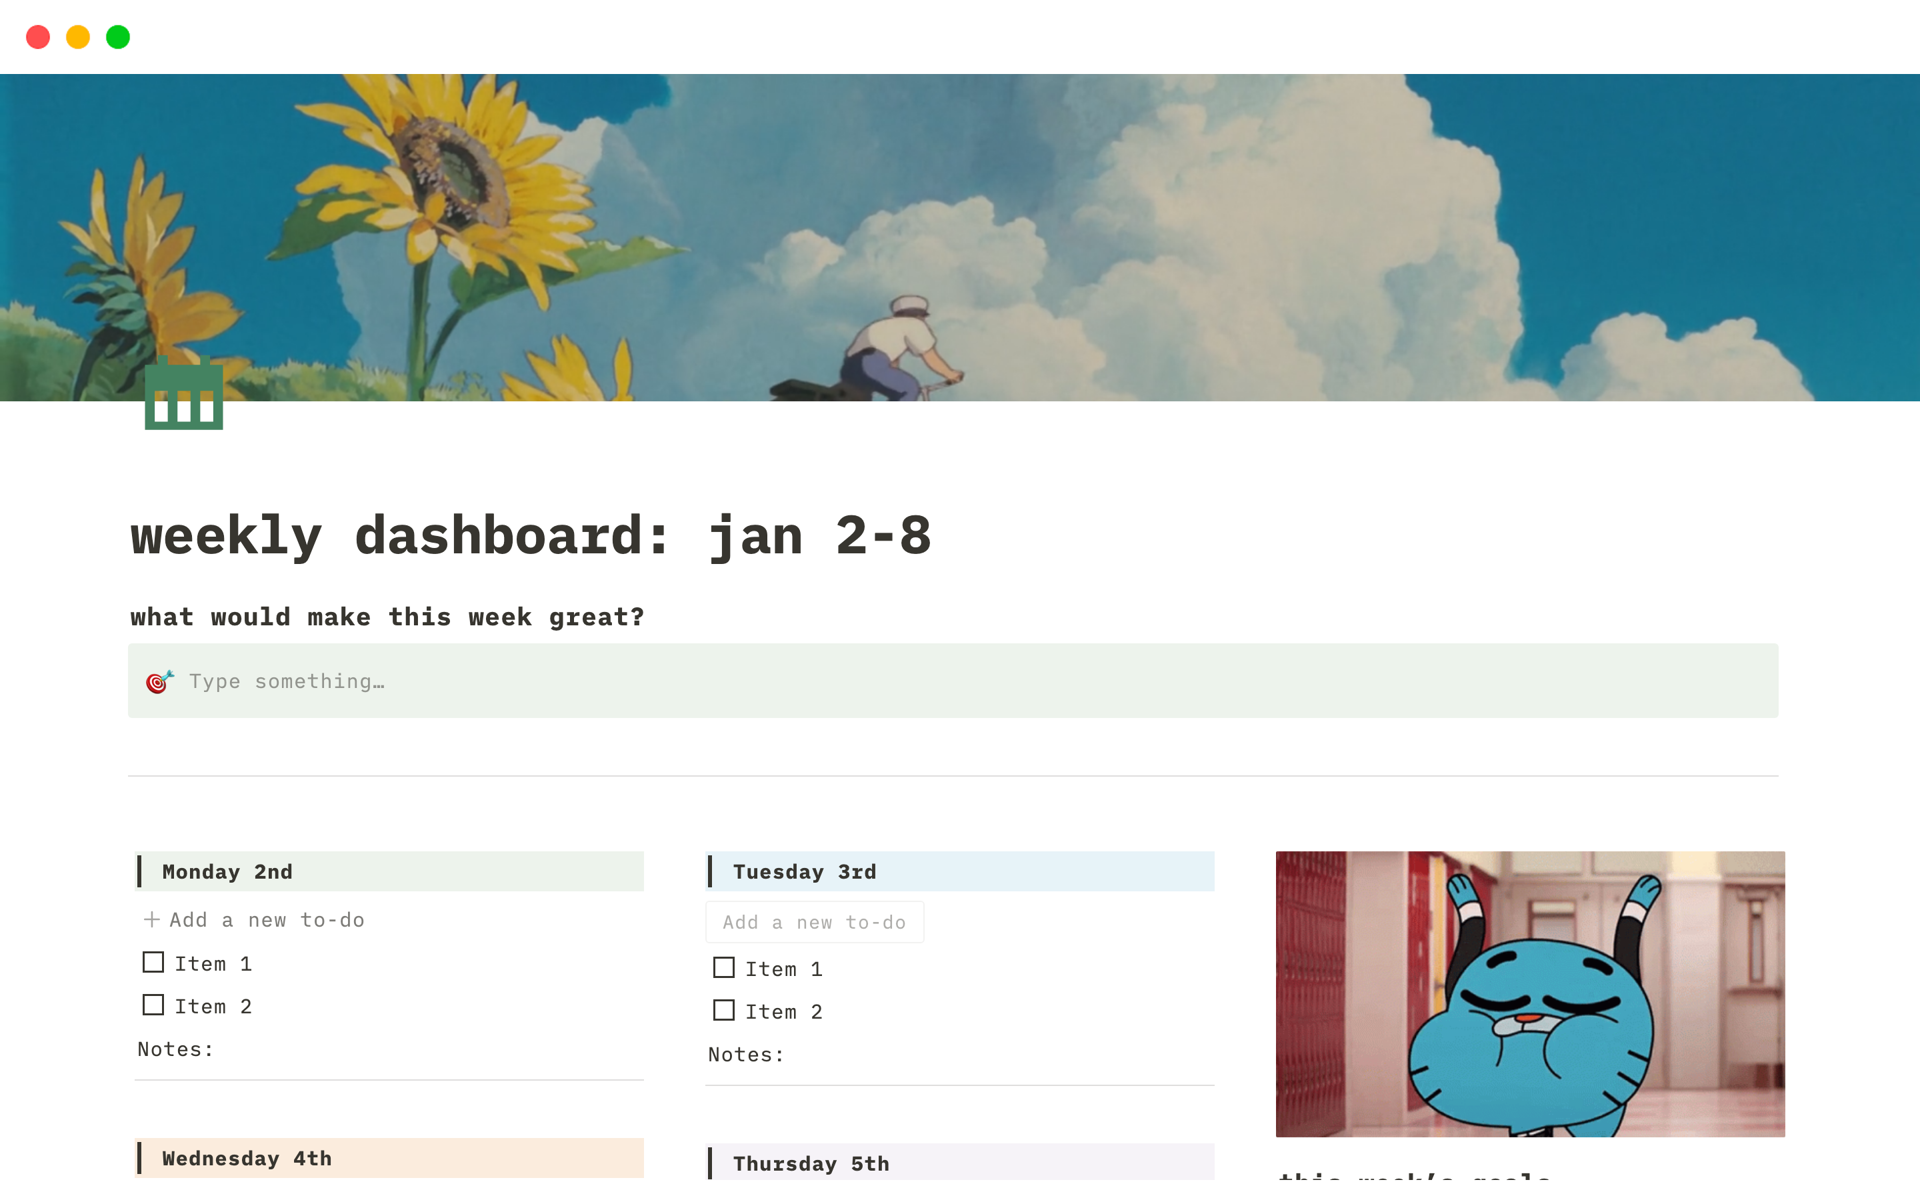 Introducing the Weekly Dashboard Notion template—a simple toolkit for planning tasks, setting goals, tracking habits, managing events, and unleashing your creative genius with brain dumps, all in one organized space!